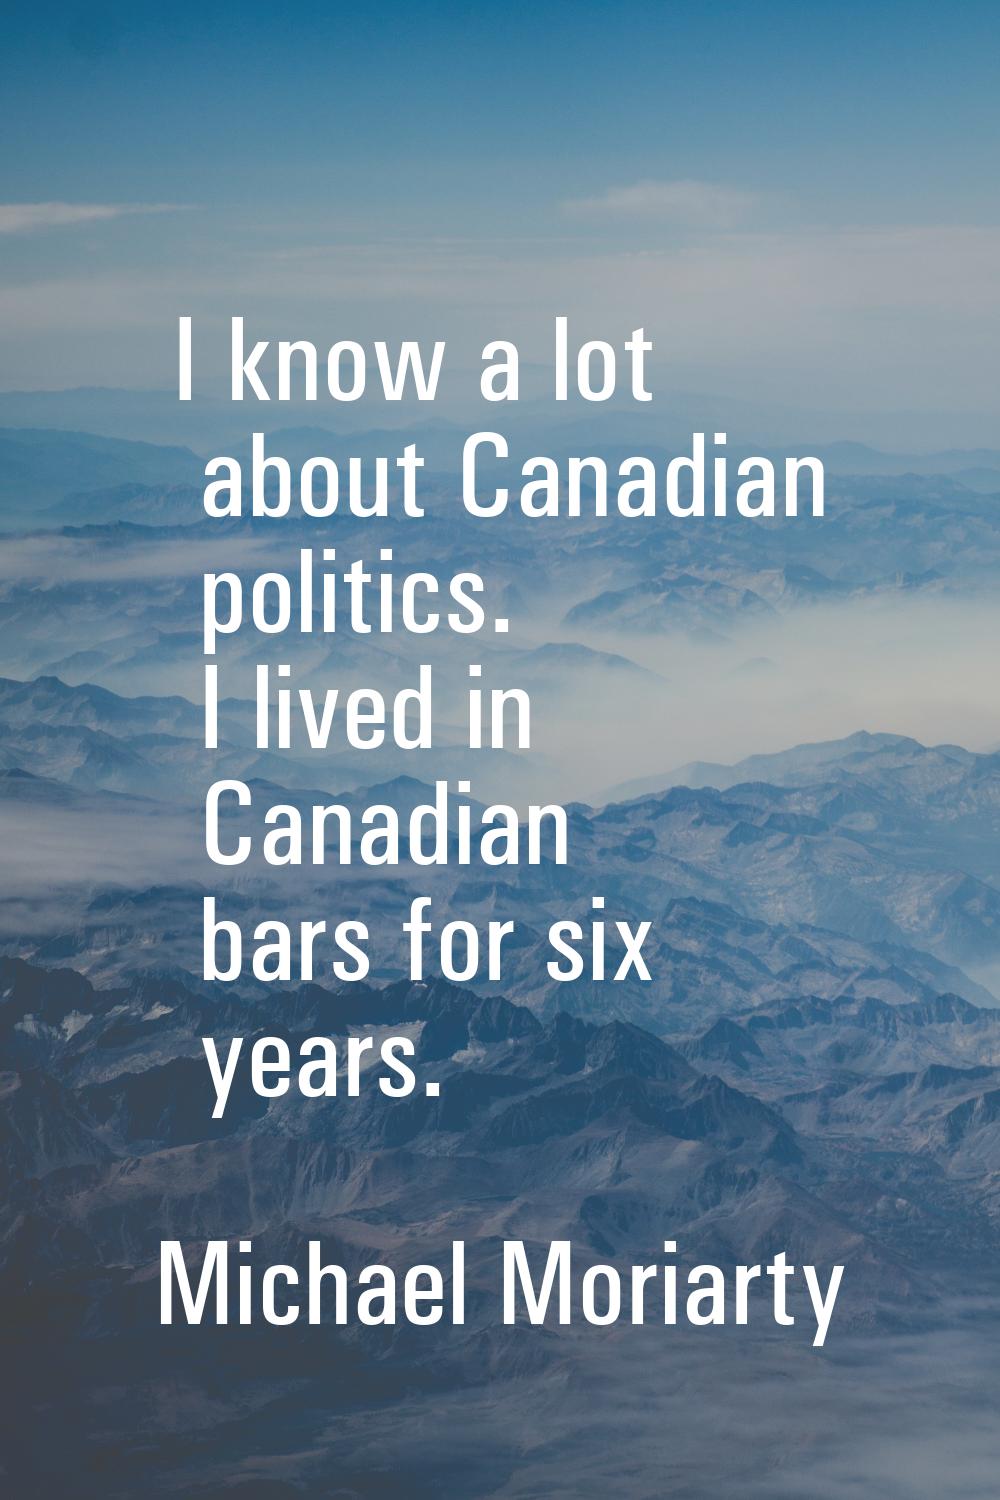 I know a lot about Canadian politics. I lived in Canadian bars for six years.